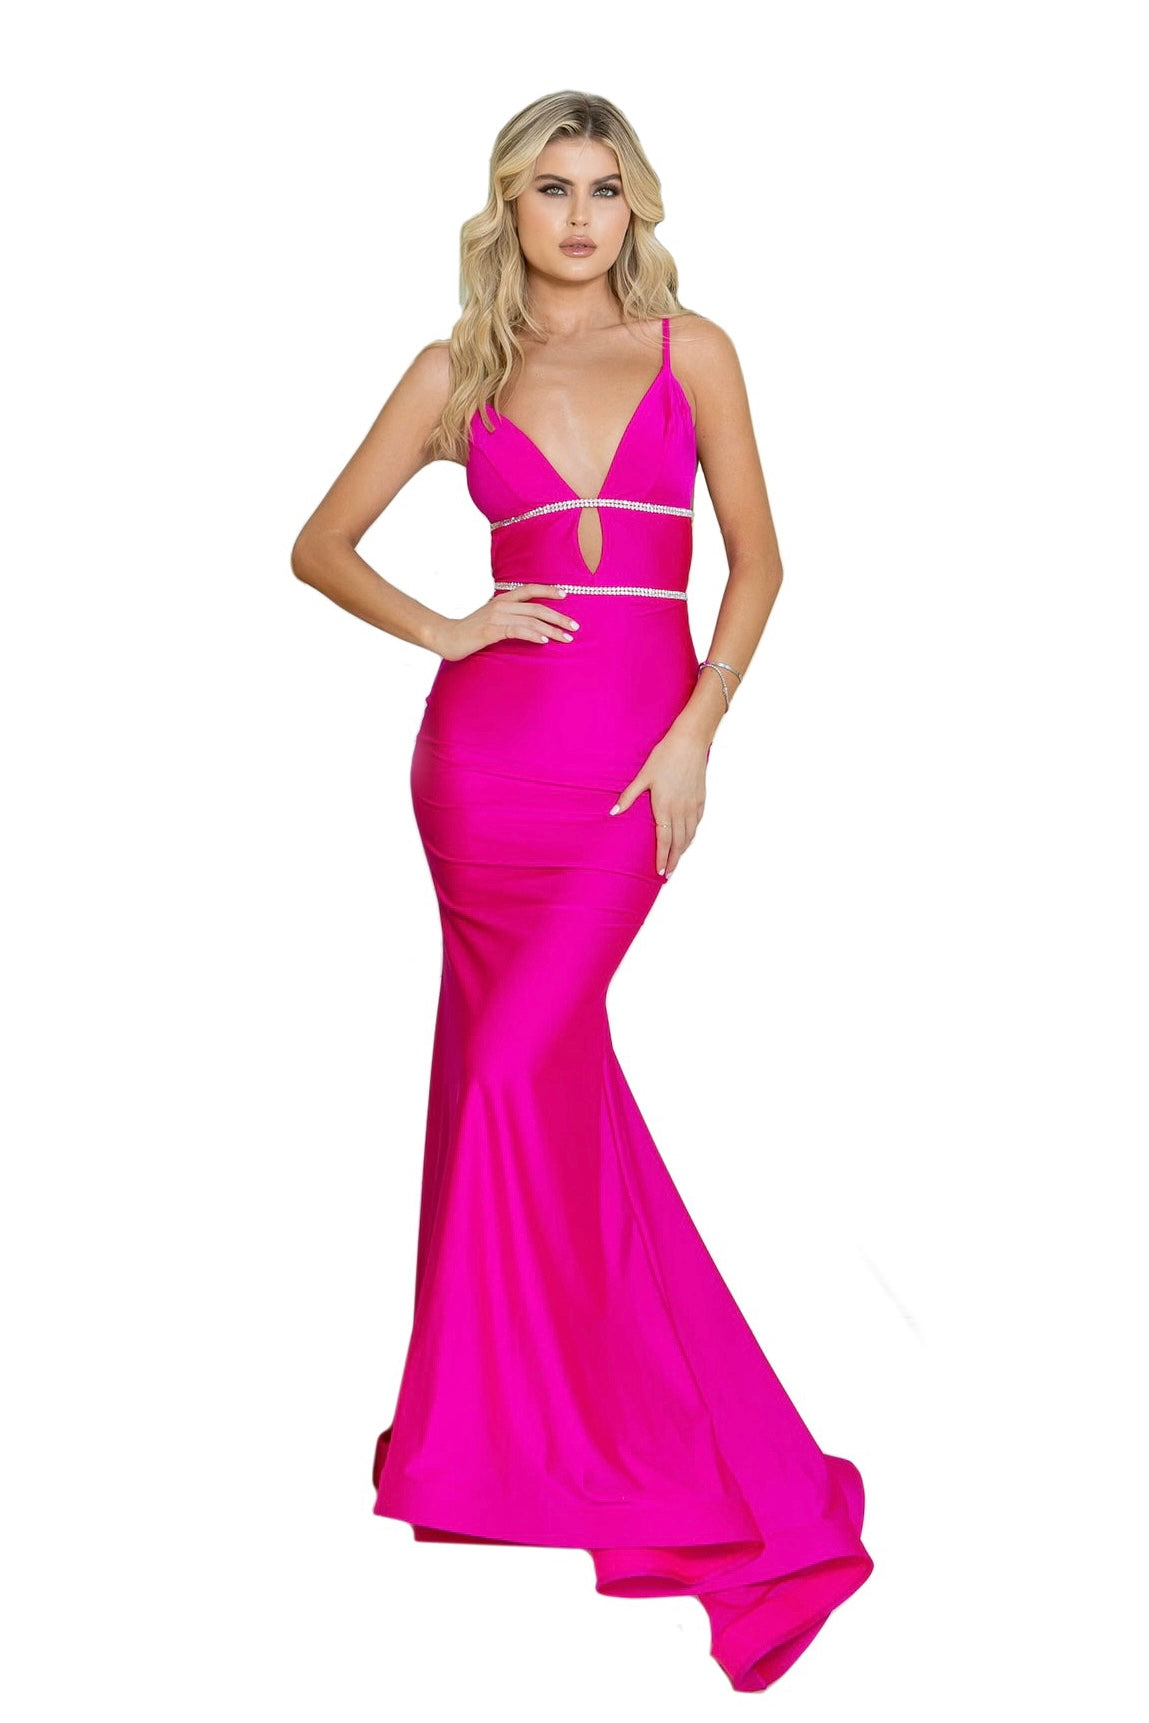 Jessica Angel Double Rhinestone Form Fitting Gown